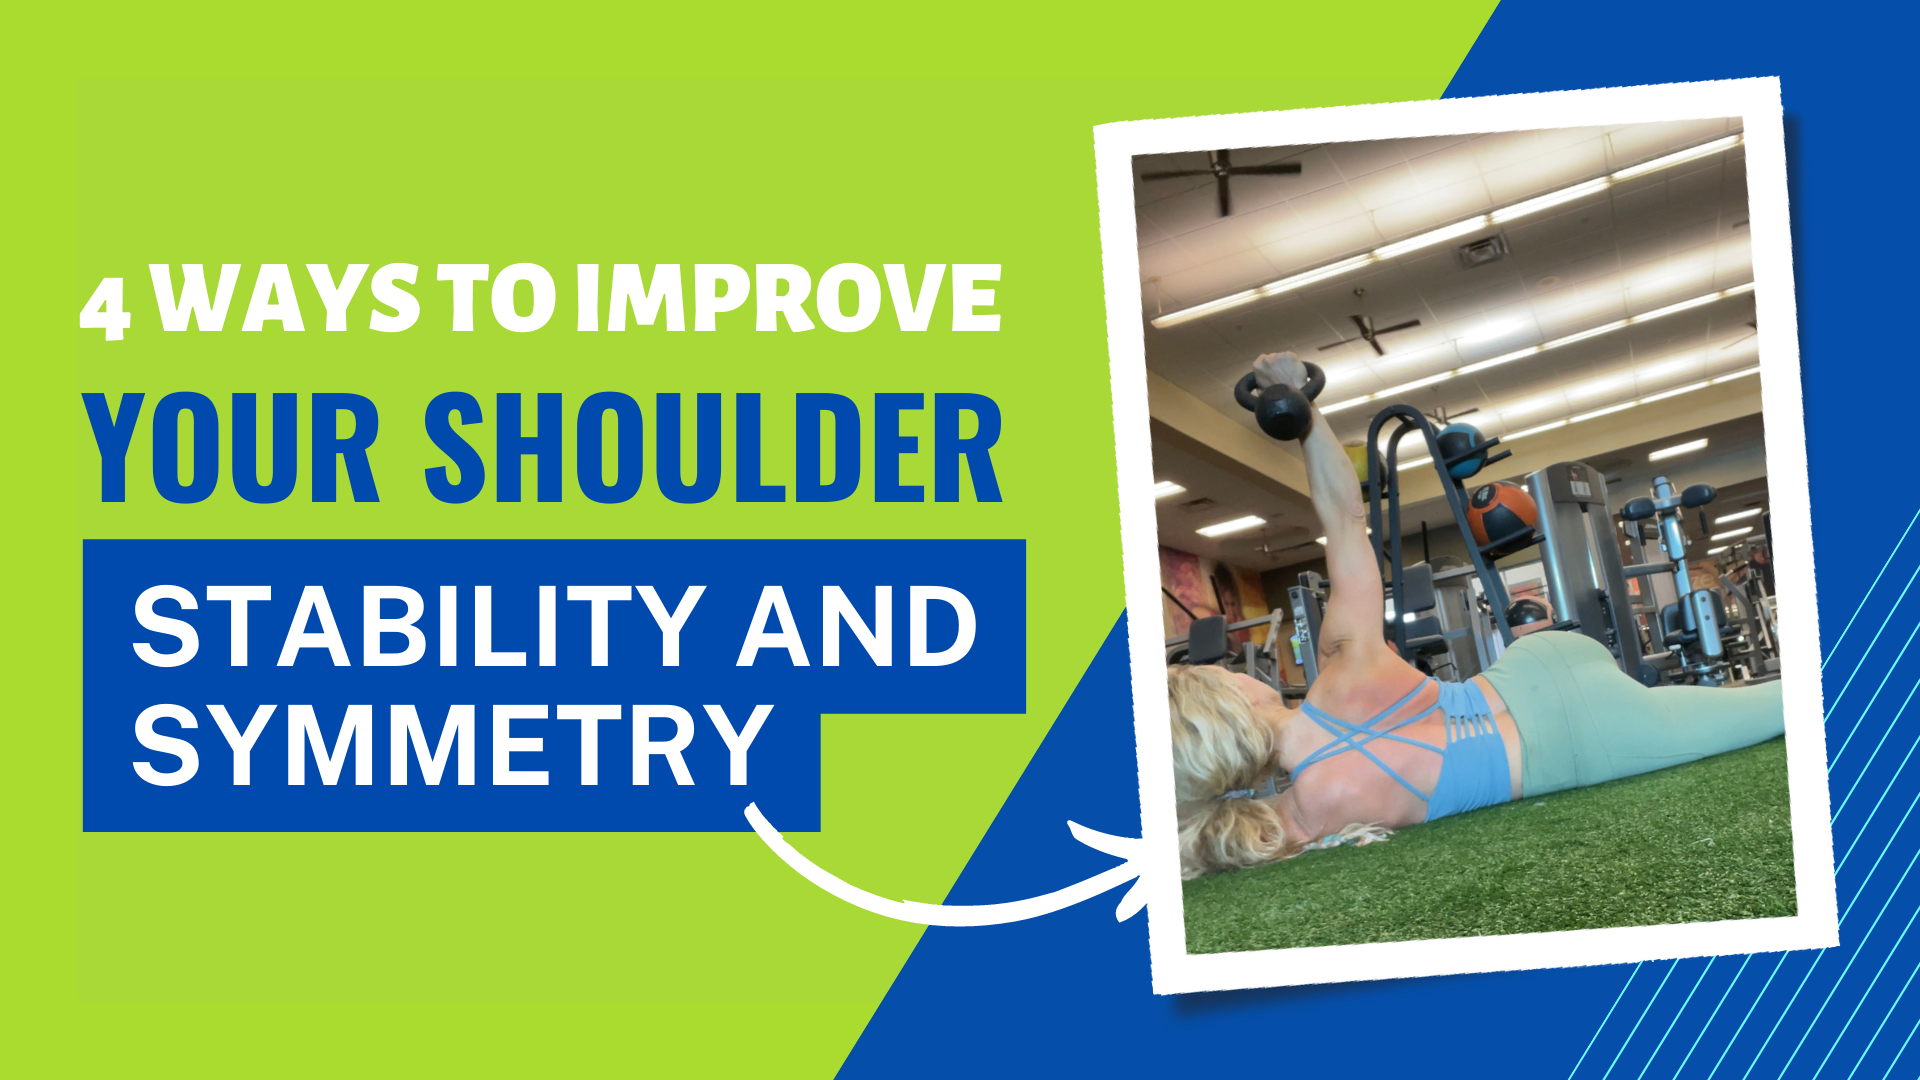 4 ways to improve your shoulder stability and symmetry